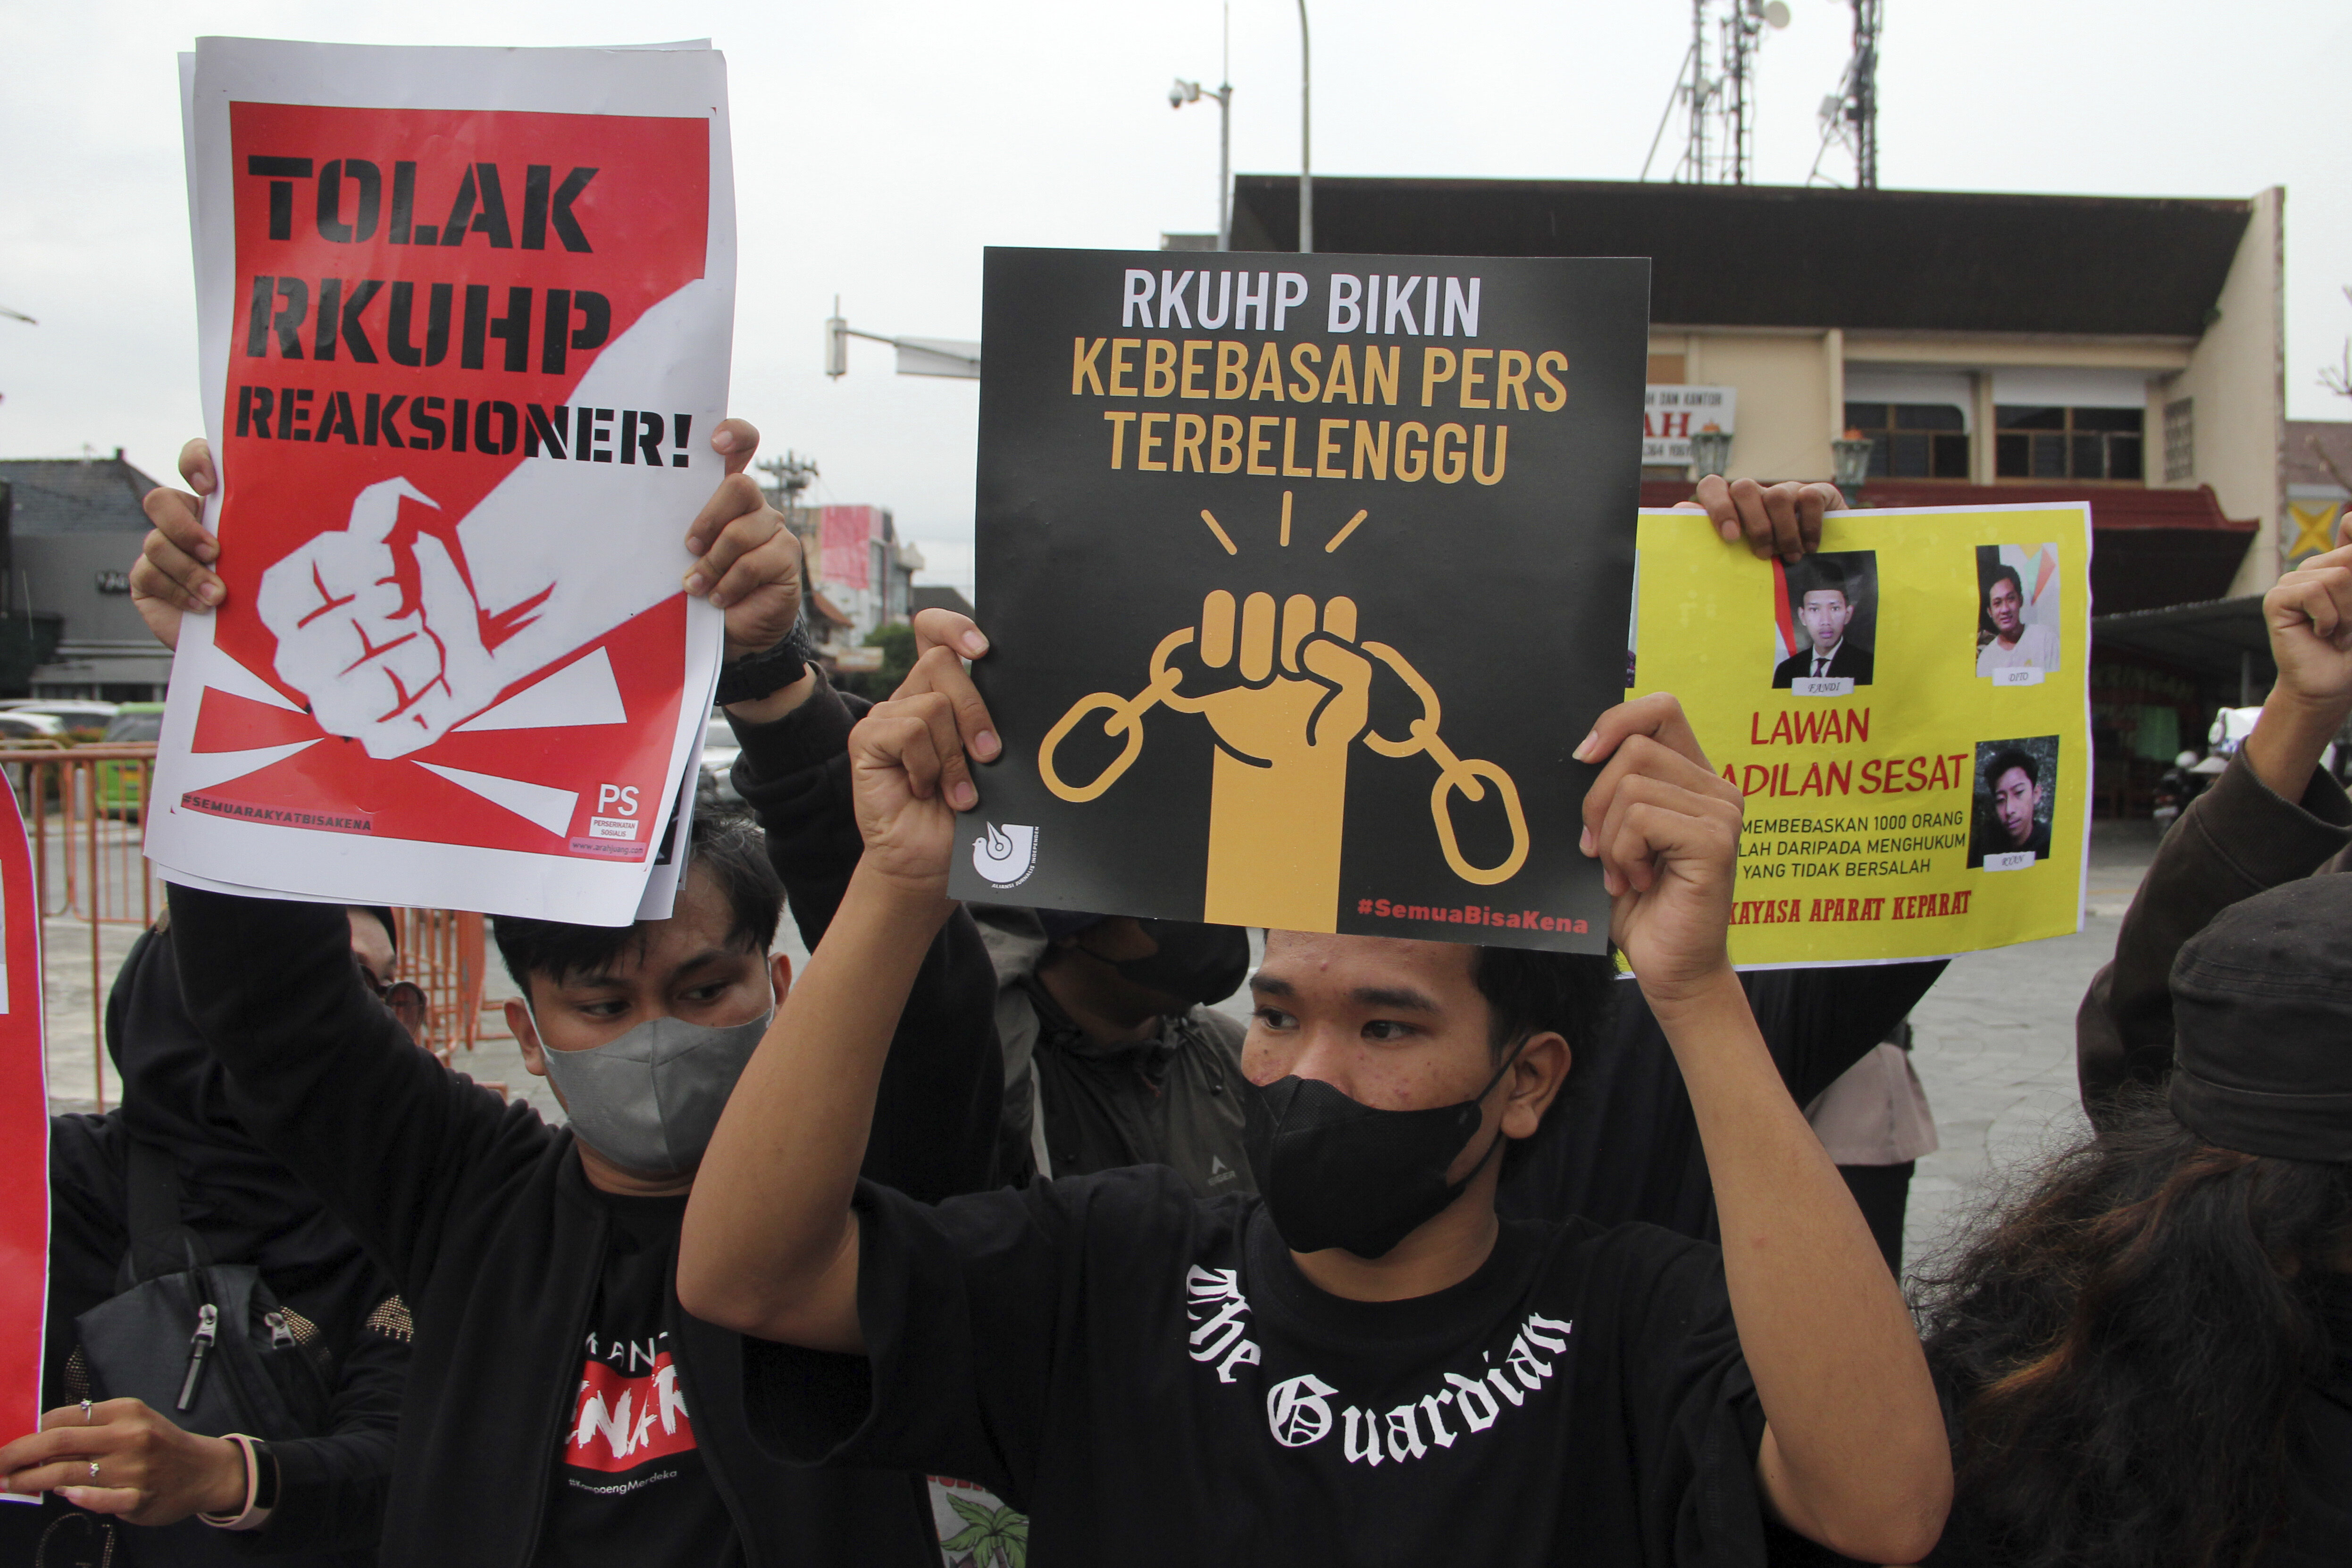 Indonesias Parliament Passes Law Criminalizing Adultery HuffPost Latest News